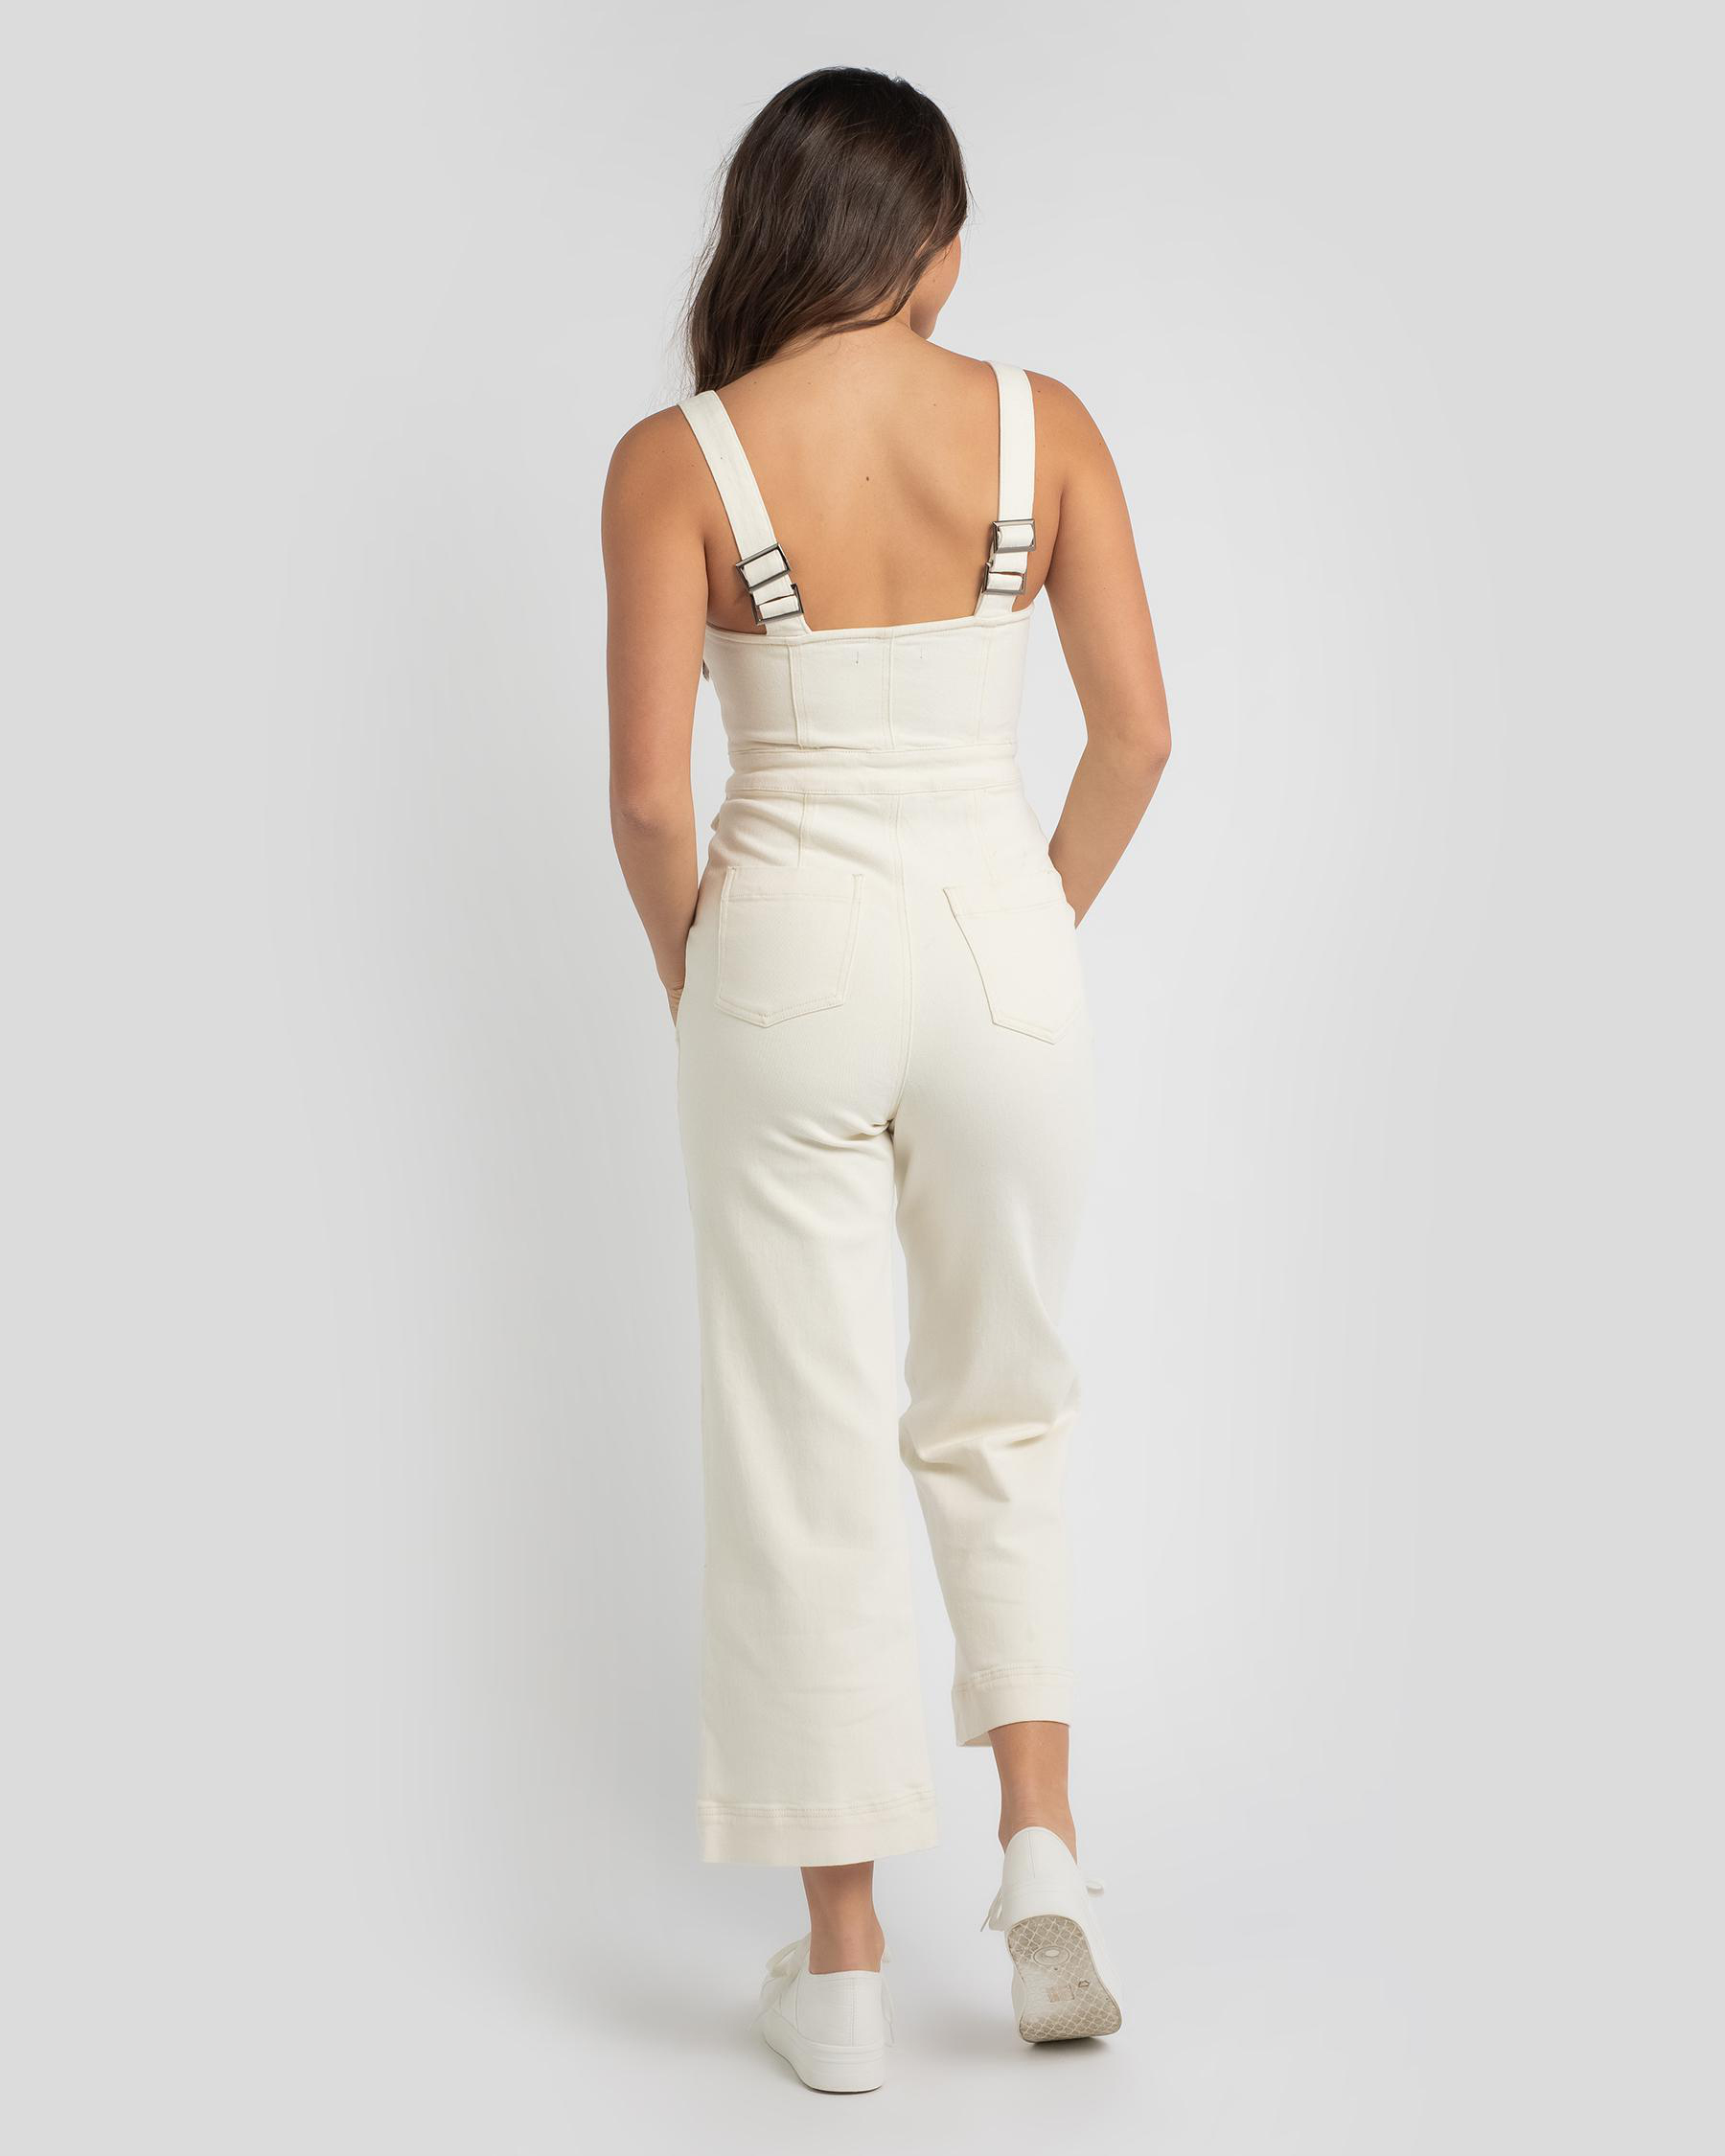 Shop Ava And Ever Monty Jumpsuit In Cream - Fast Shipping & Easy ...